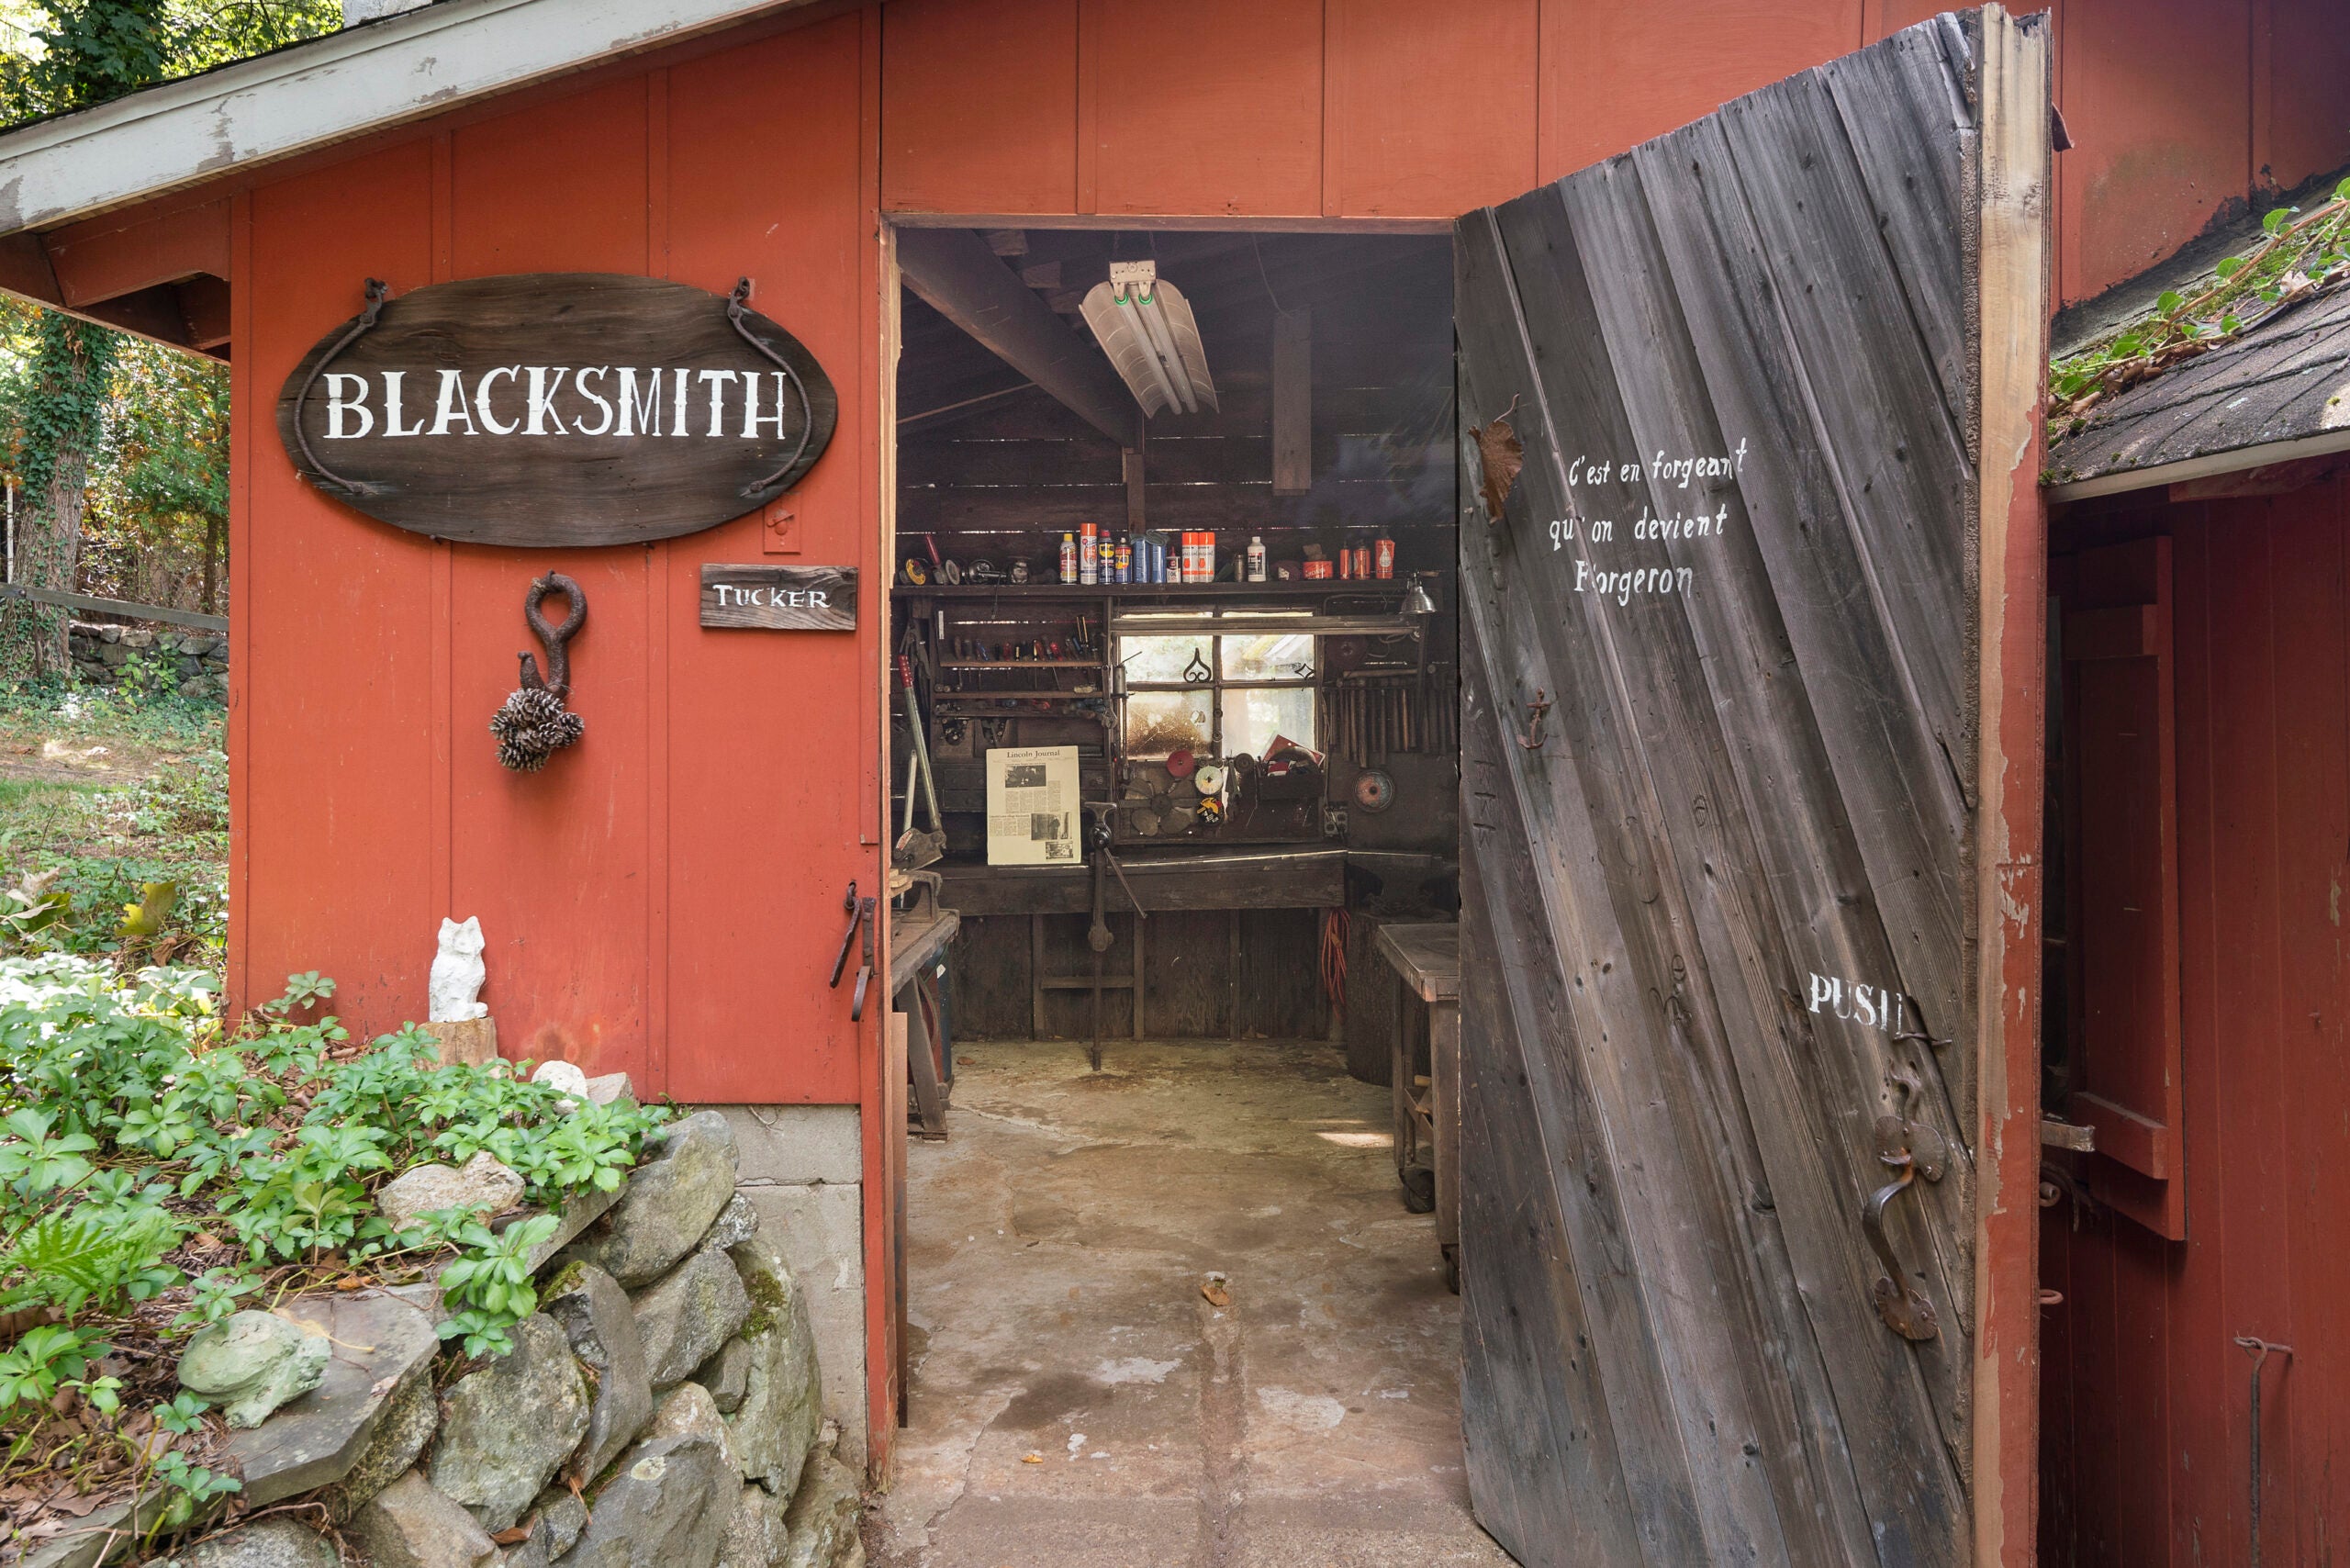 A red workshop with a blacksmith sigh.